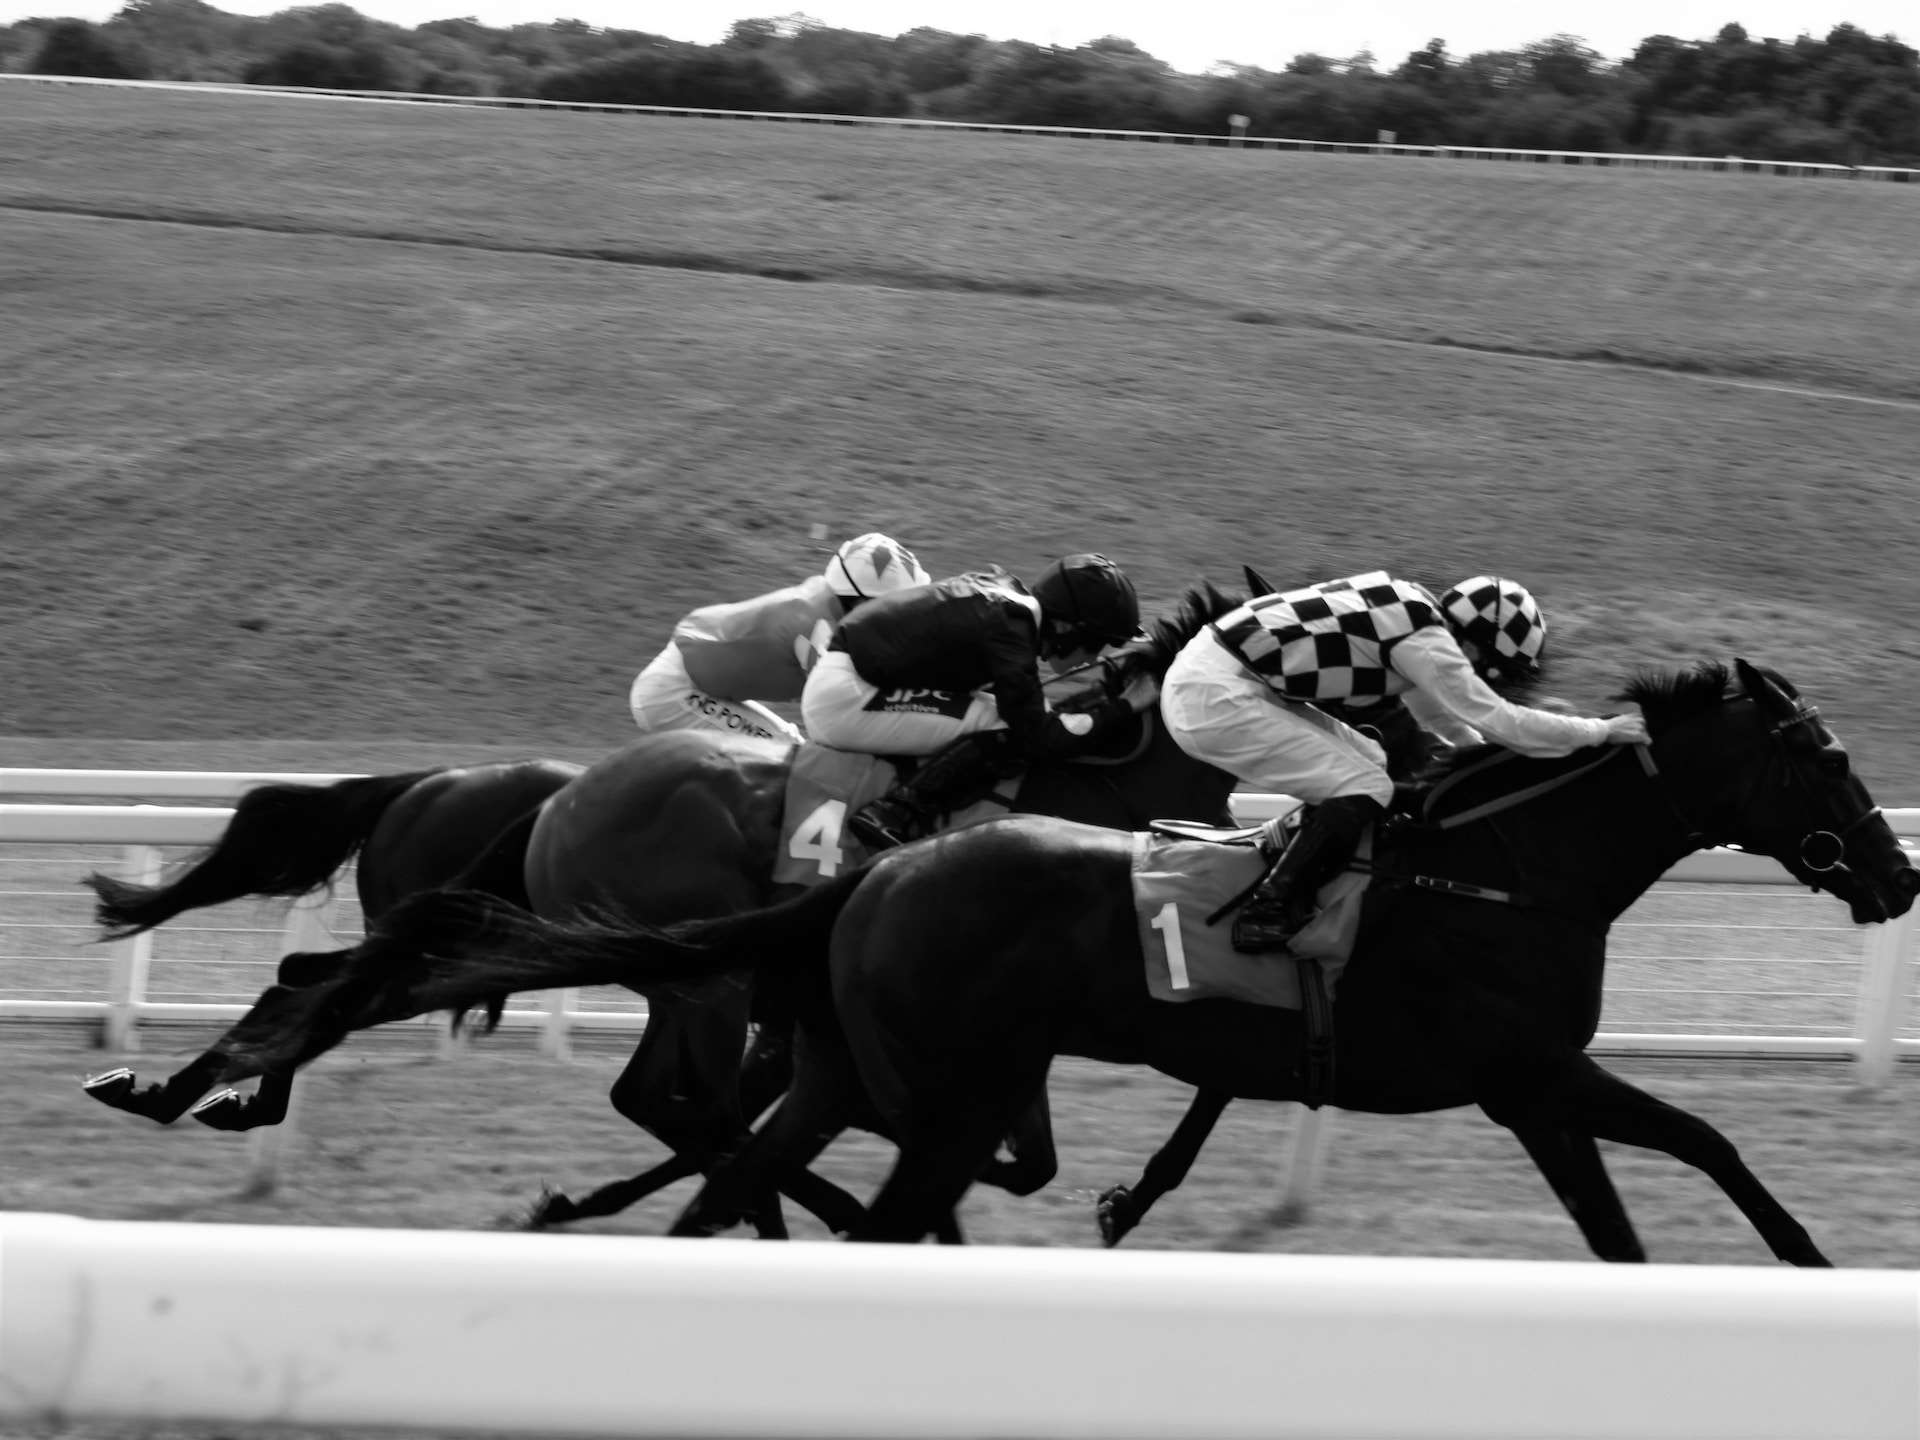 From support act to thrilling highlight: A short history of the Aintree Bowl image reflecting horse racing in black and white. Photo by Pardeep Bhakar on Unsplash